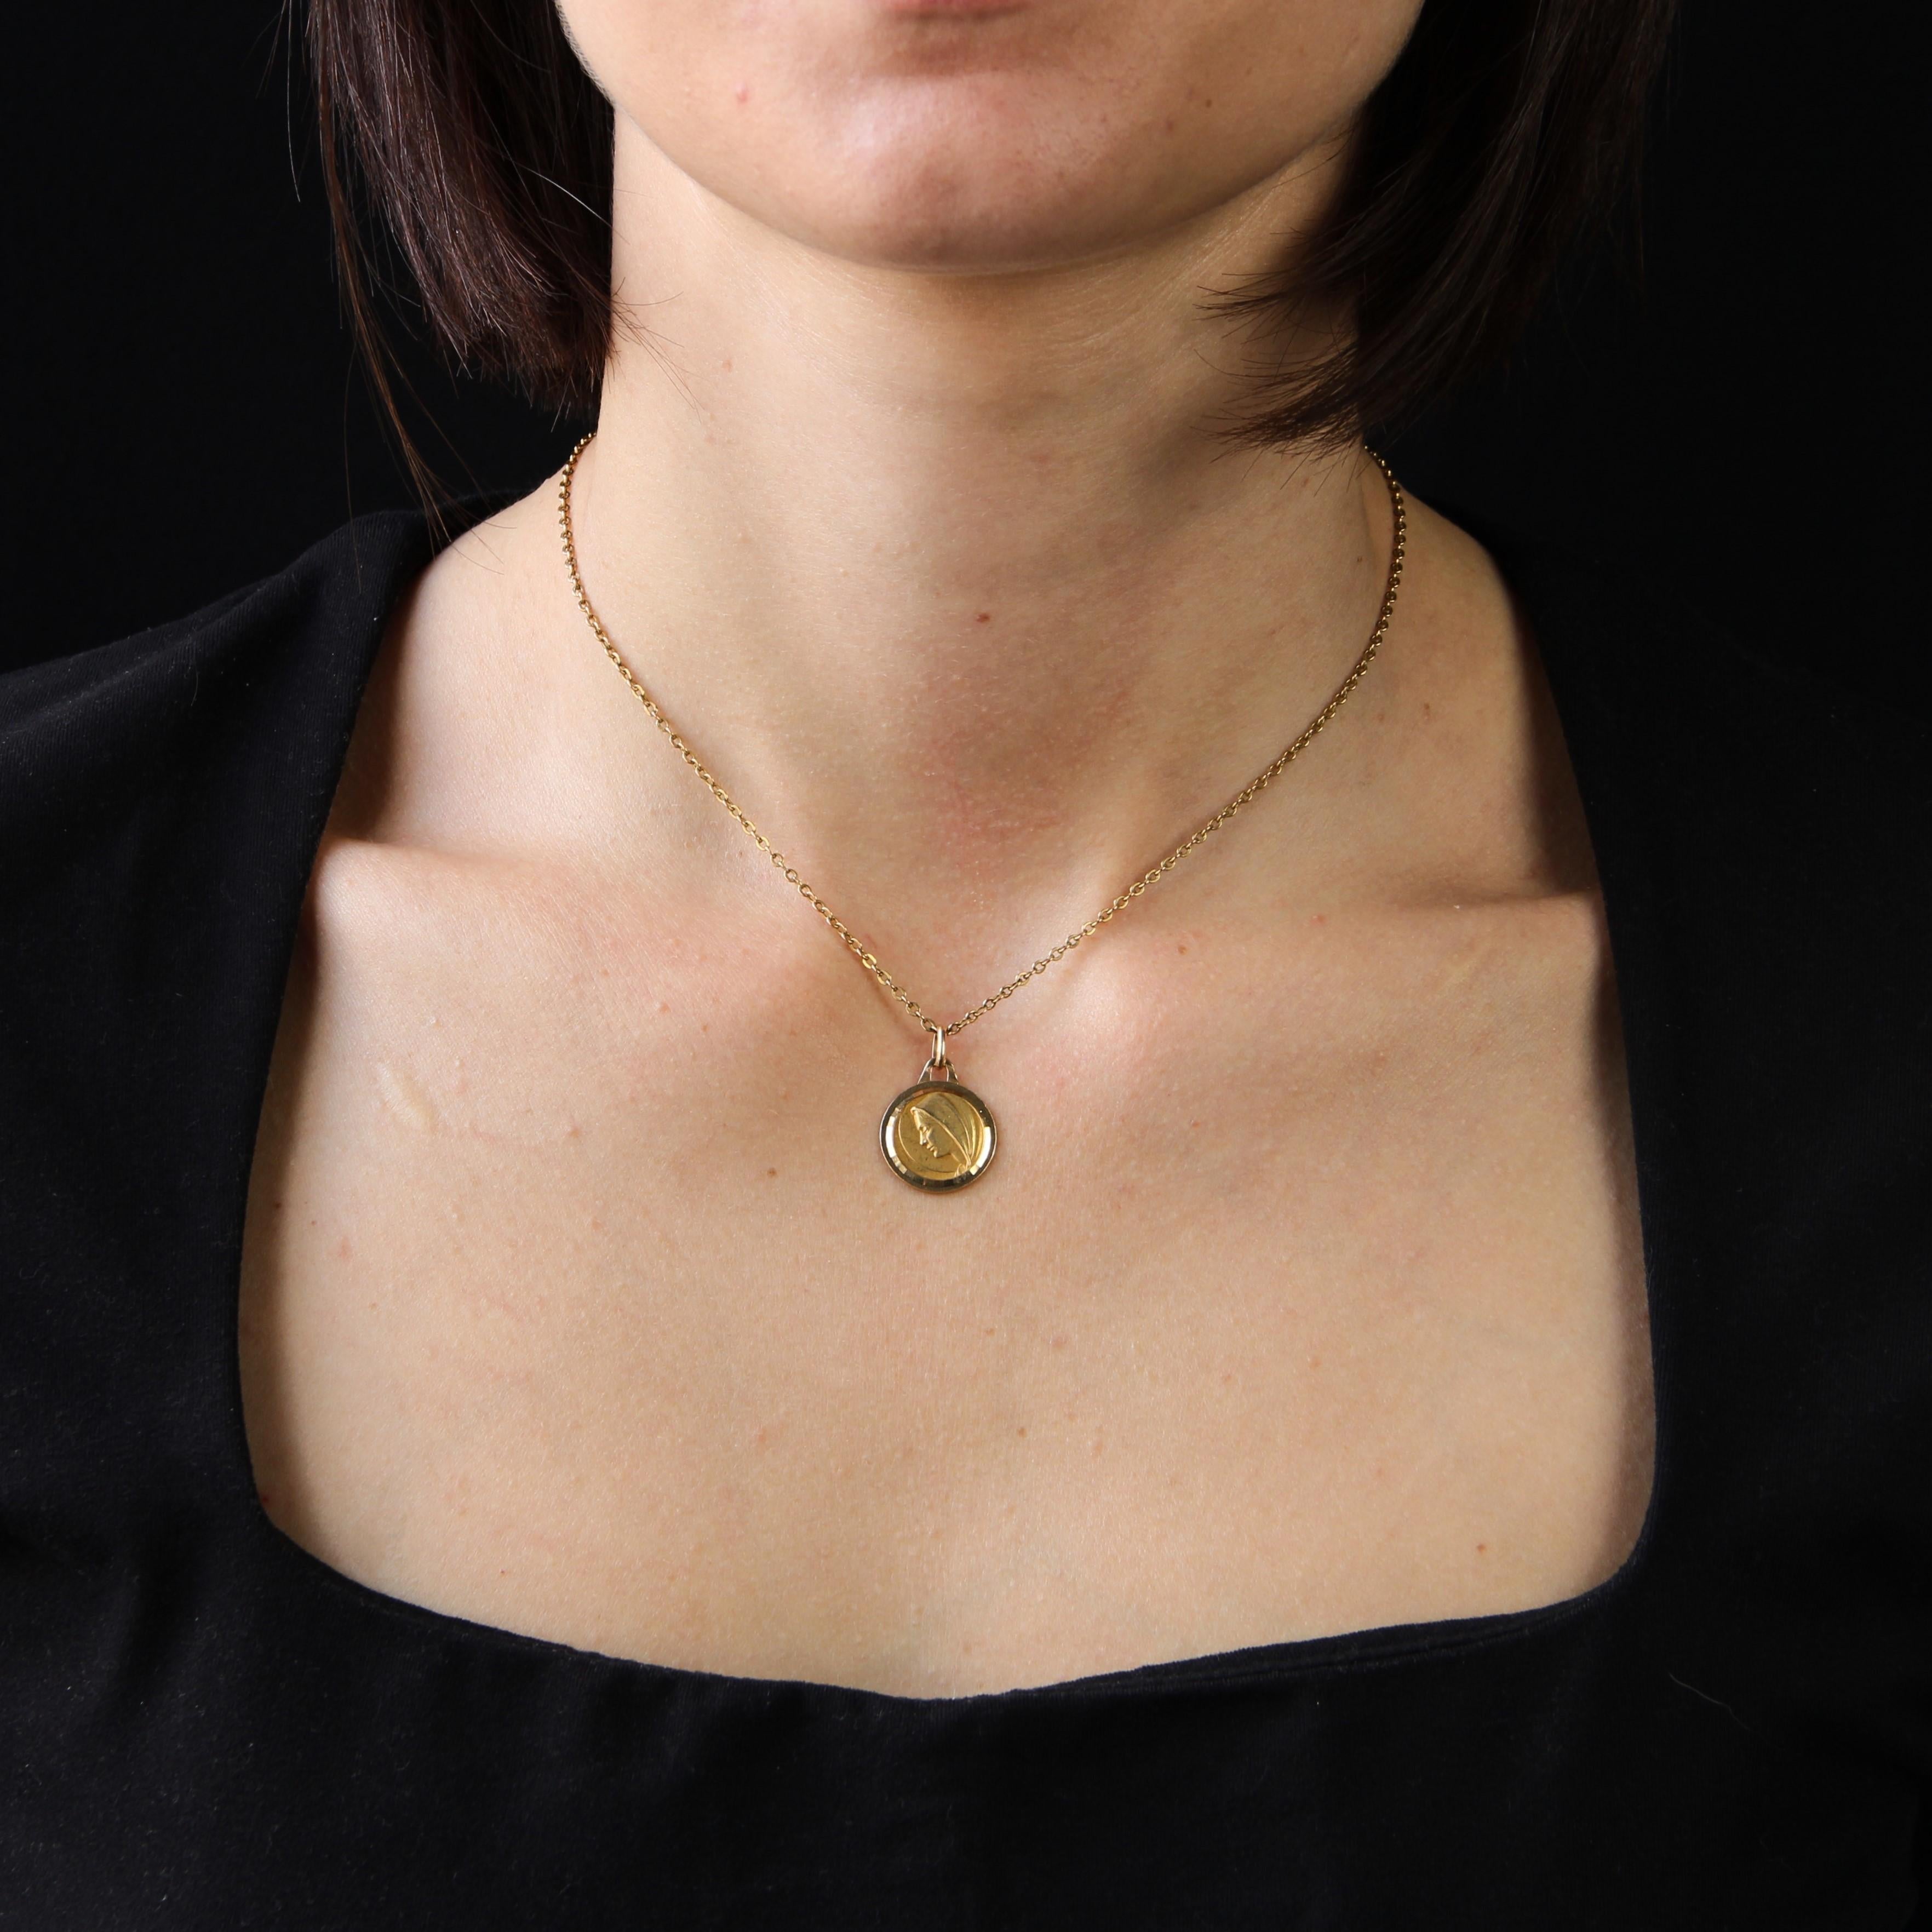 Medal in 18 karat yellow gold, eagle head hallmark.
This religious pendant features the profile of the Virgin Mary surrounded by two borders of faceted yellow gold.
The back is engraved: 